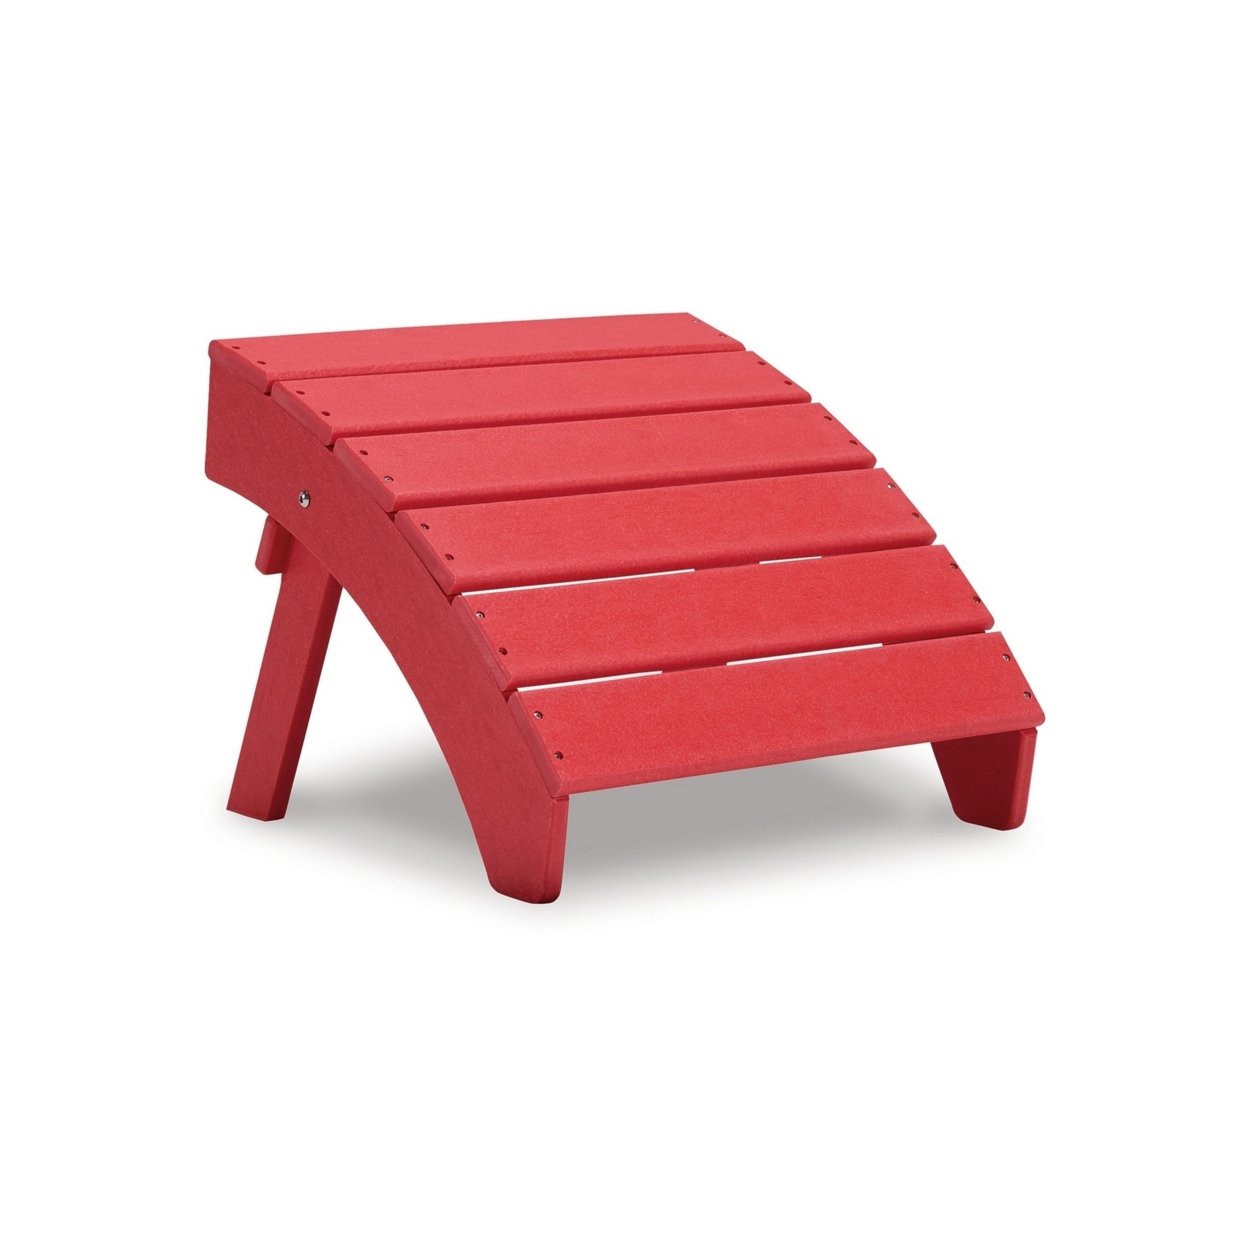 Quiz 20 Inch Outdoor Ottoman, Sloped Slatted Design, Bold Red HDPE Frame